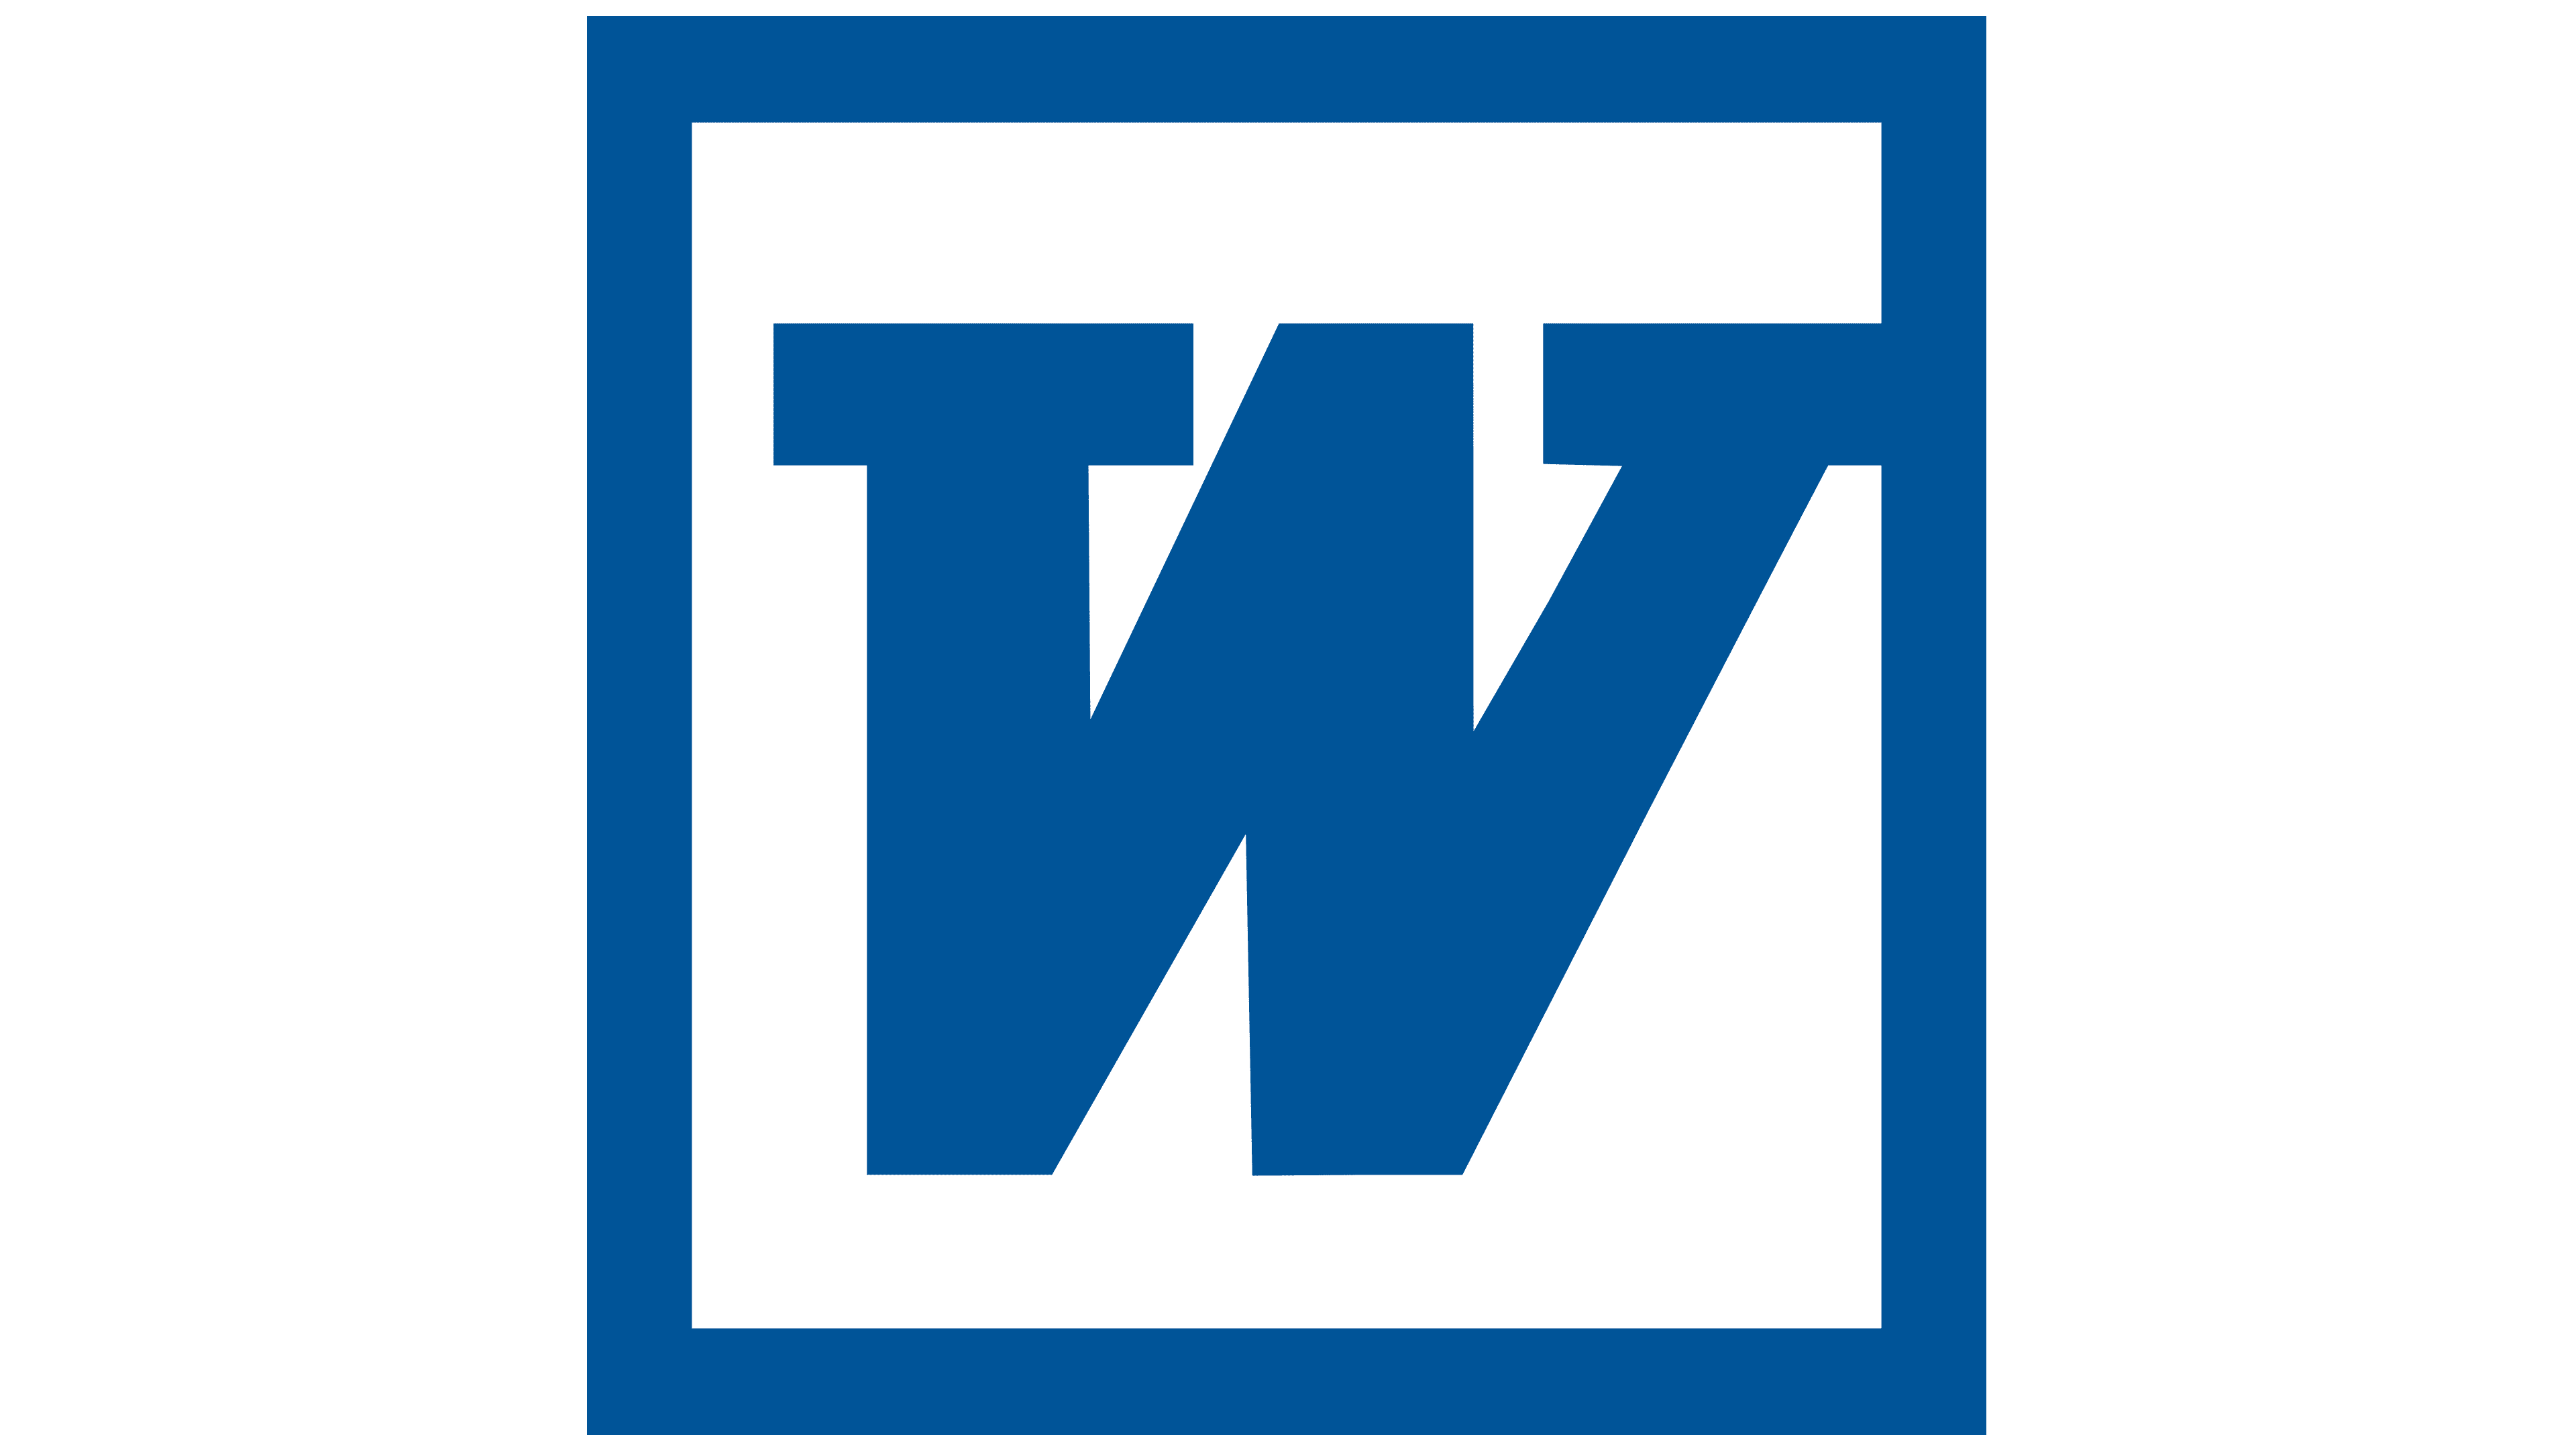 Microsoft Word Logo, PNG, Symbol, History, Meaning